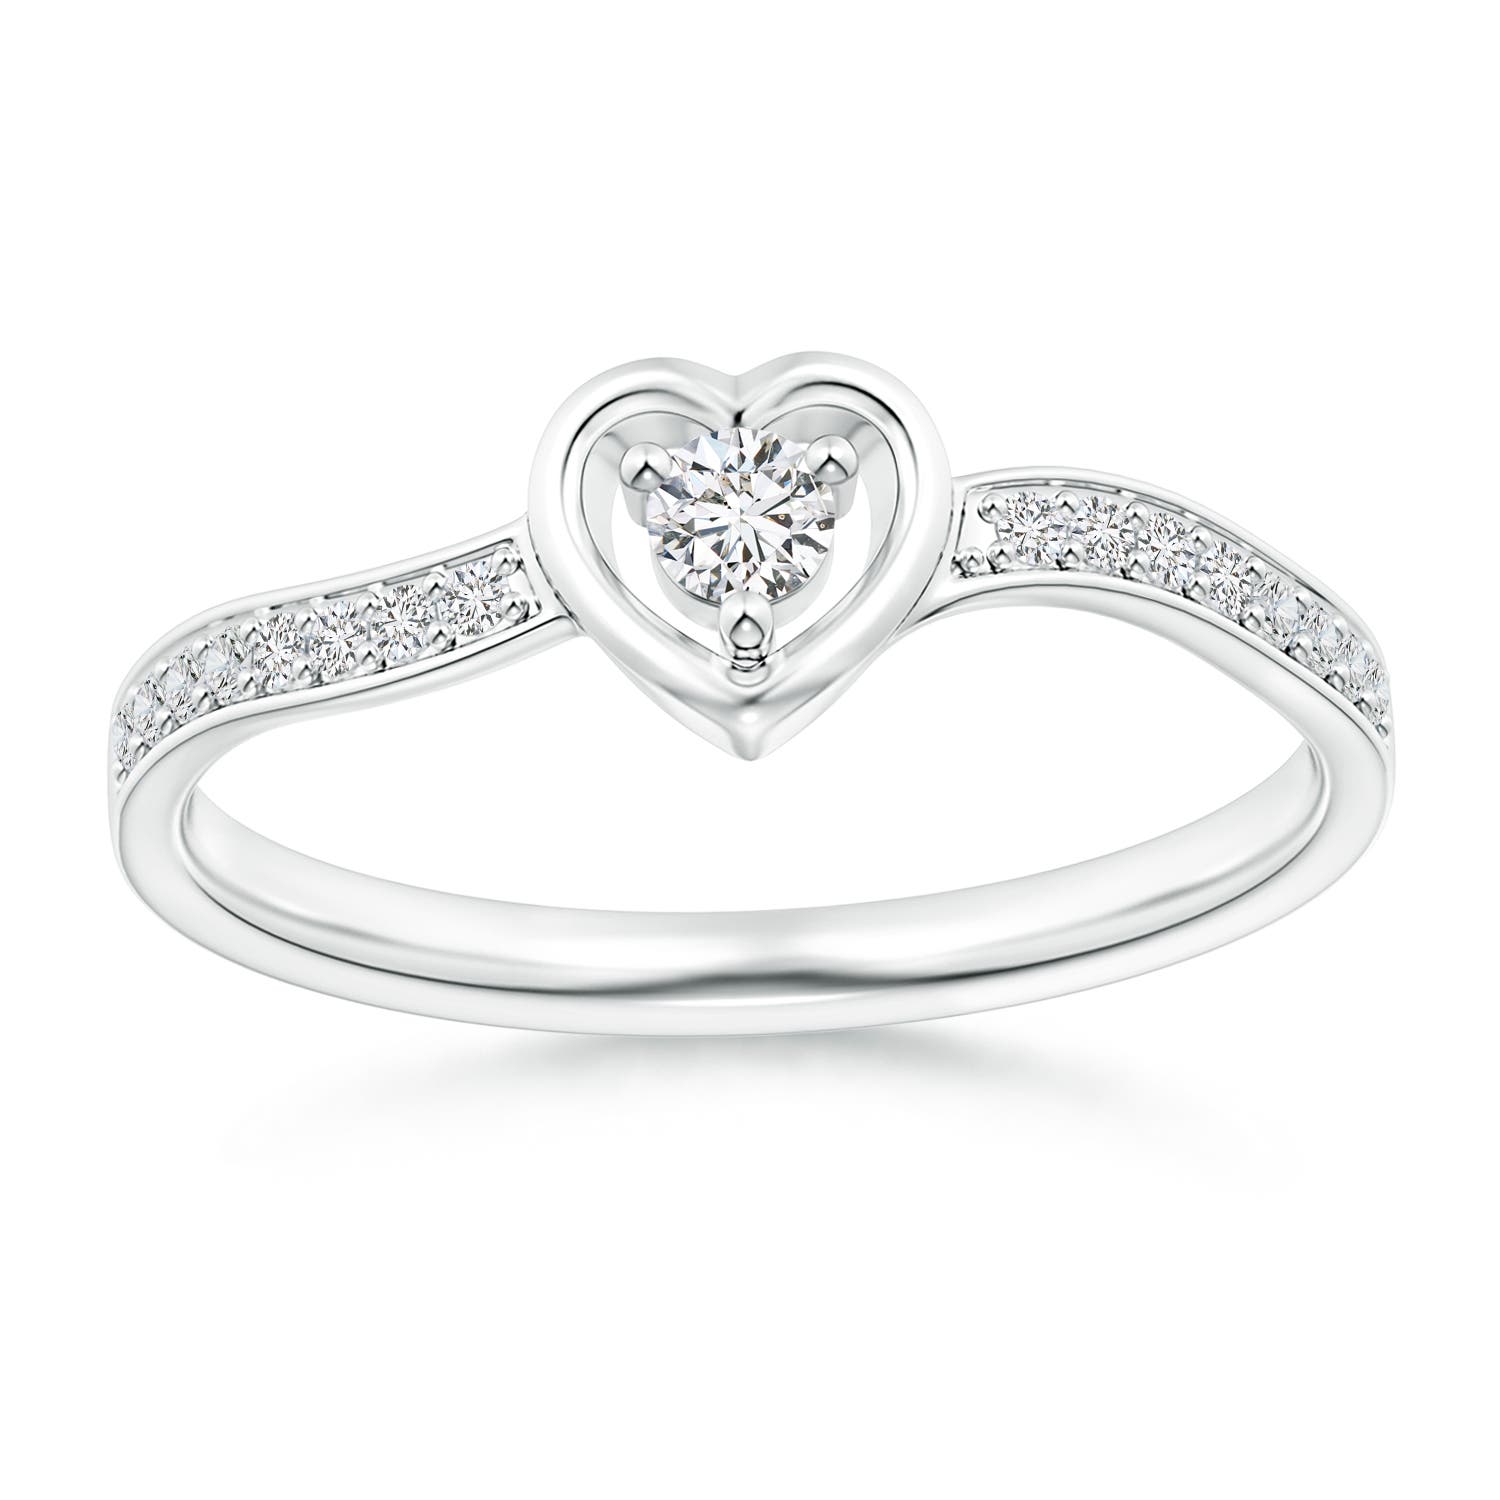 Silver Embellished Open Heart Ring